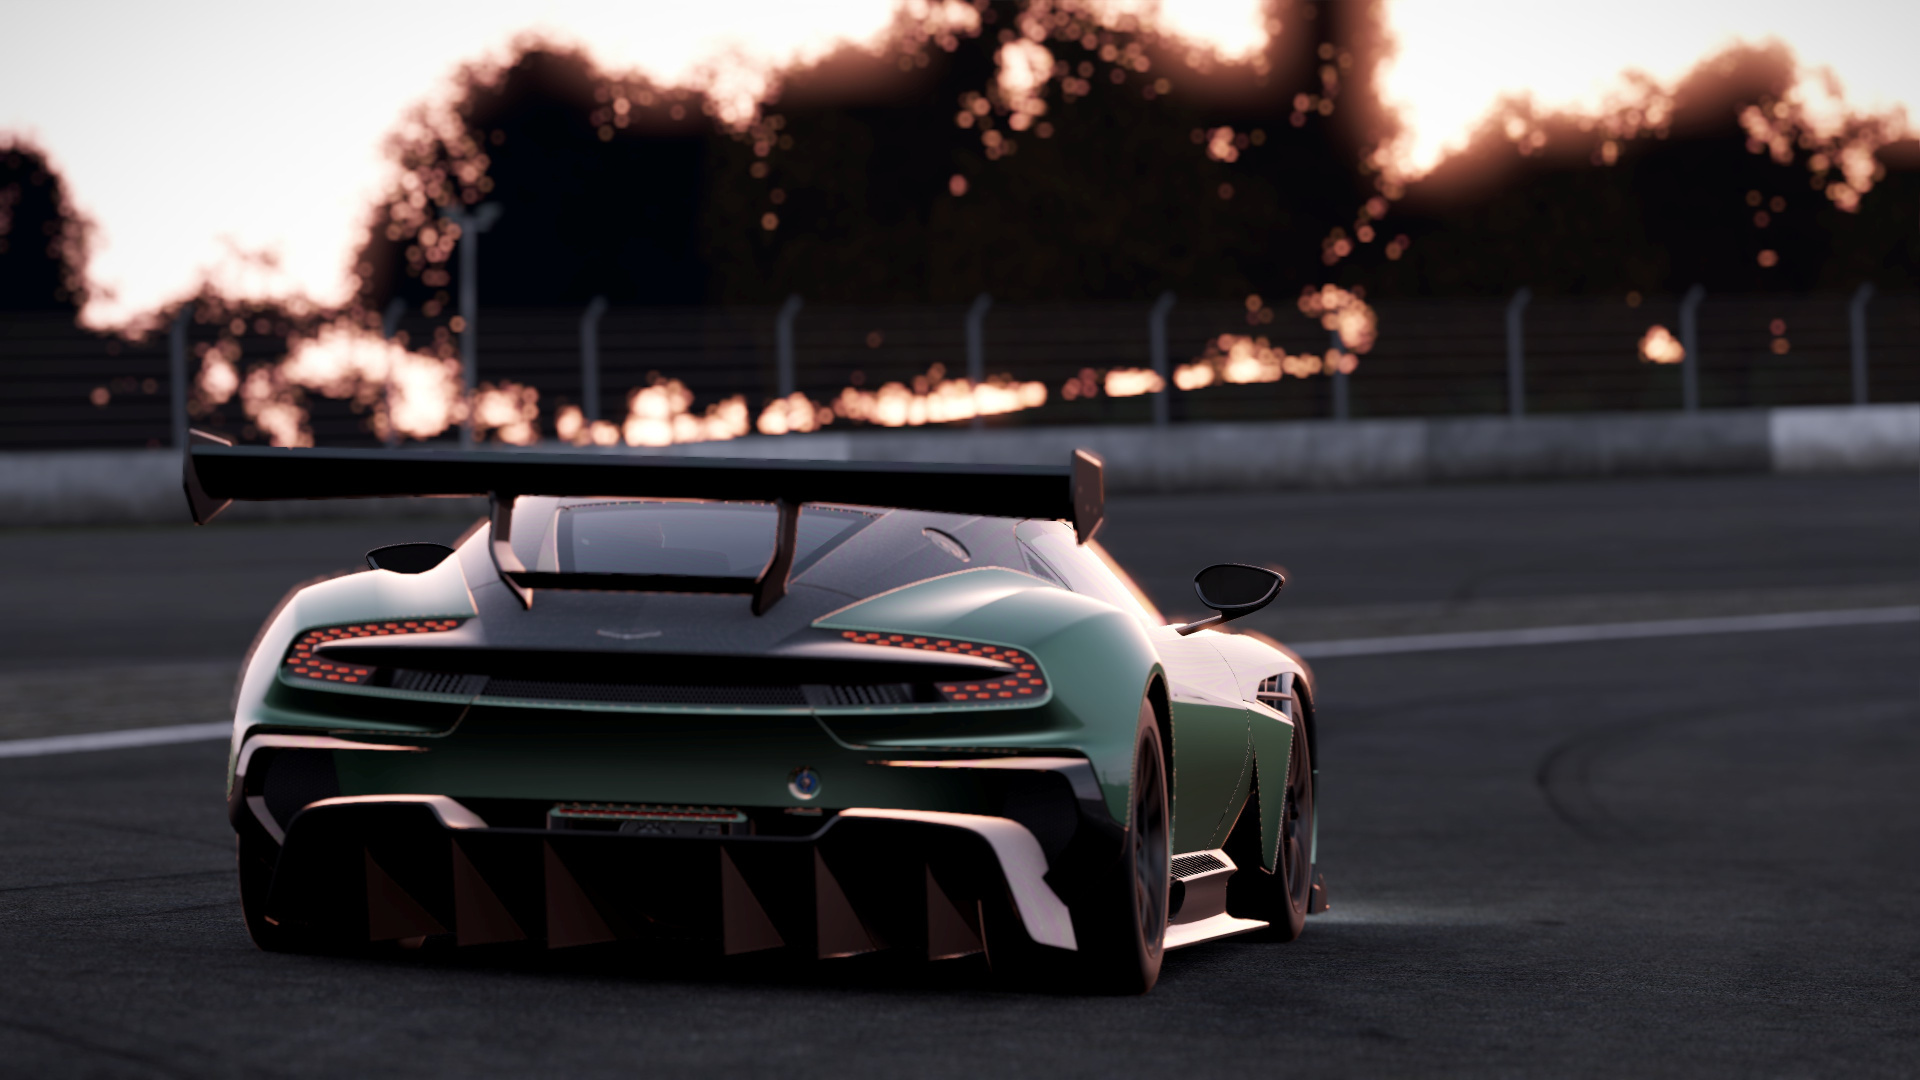 4k project cars 2 background